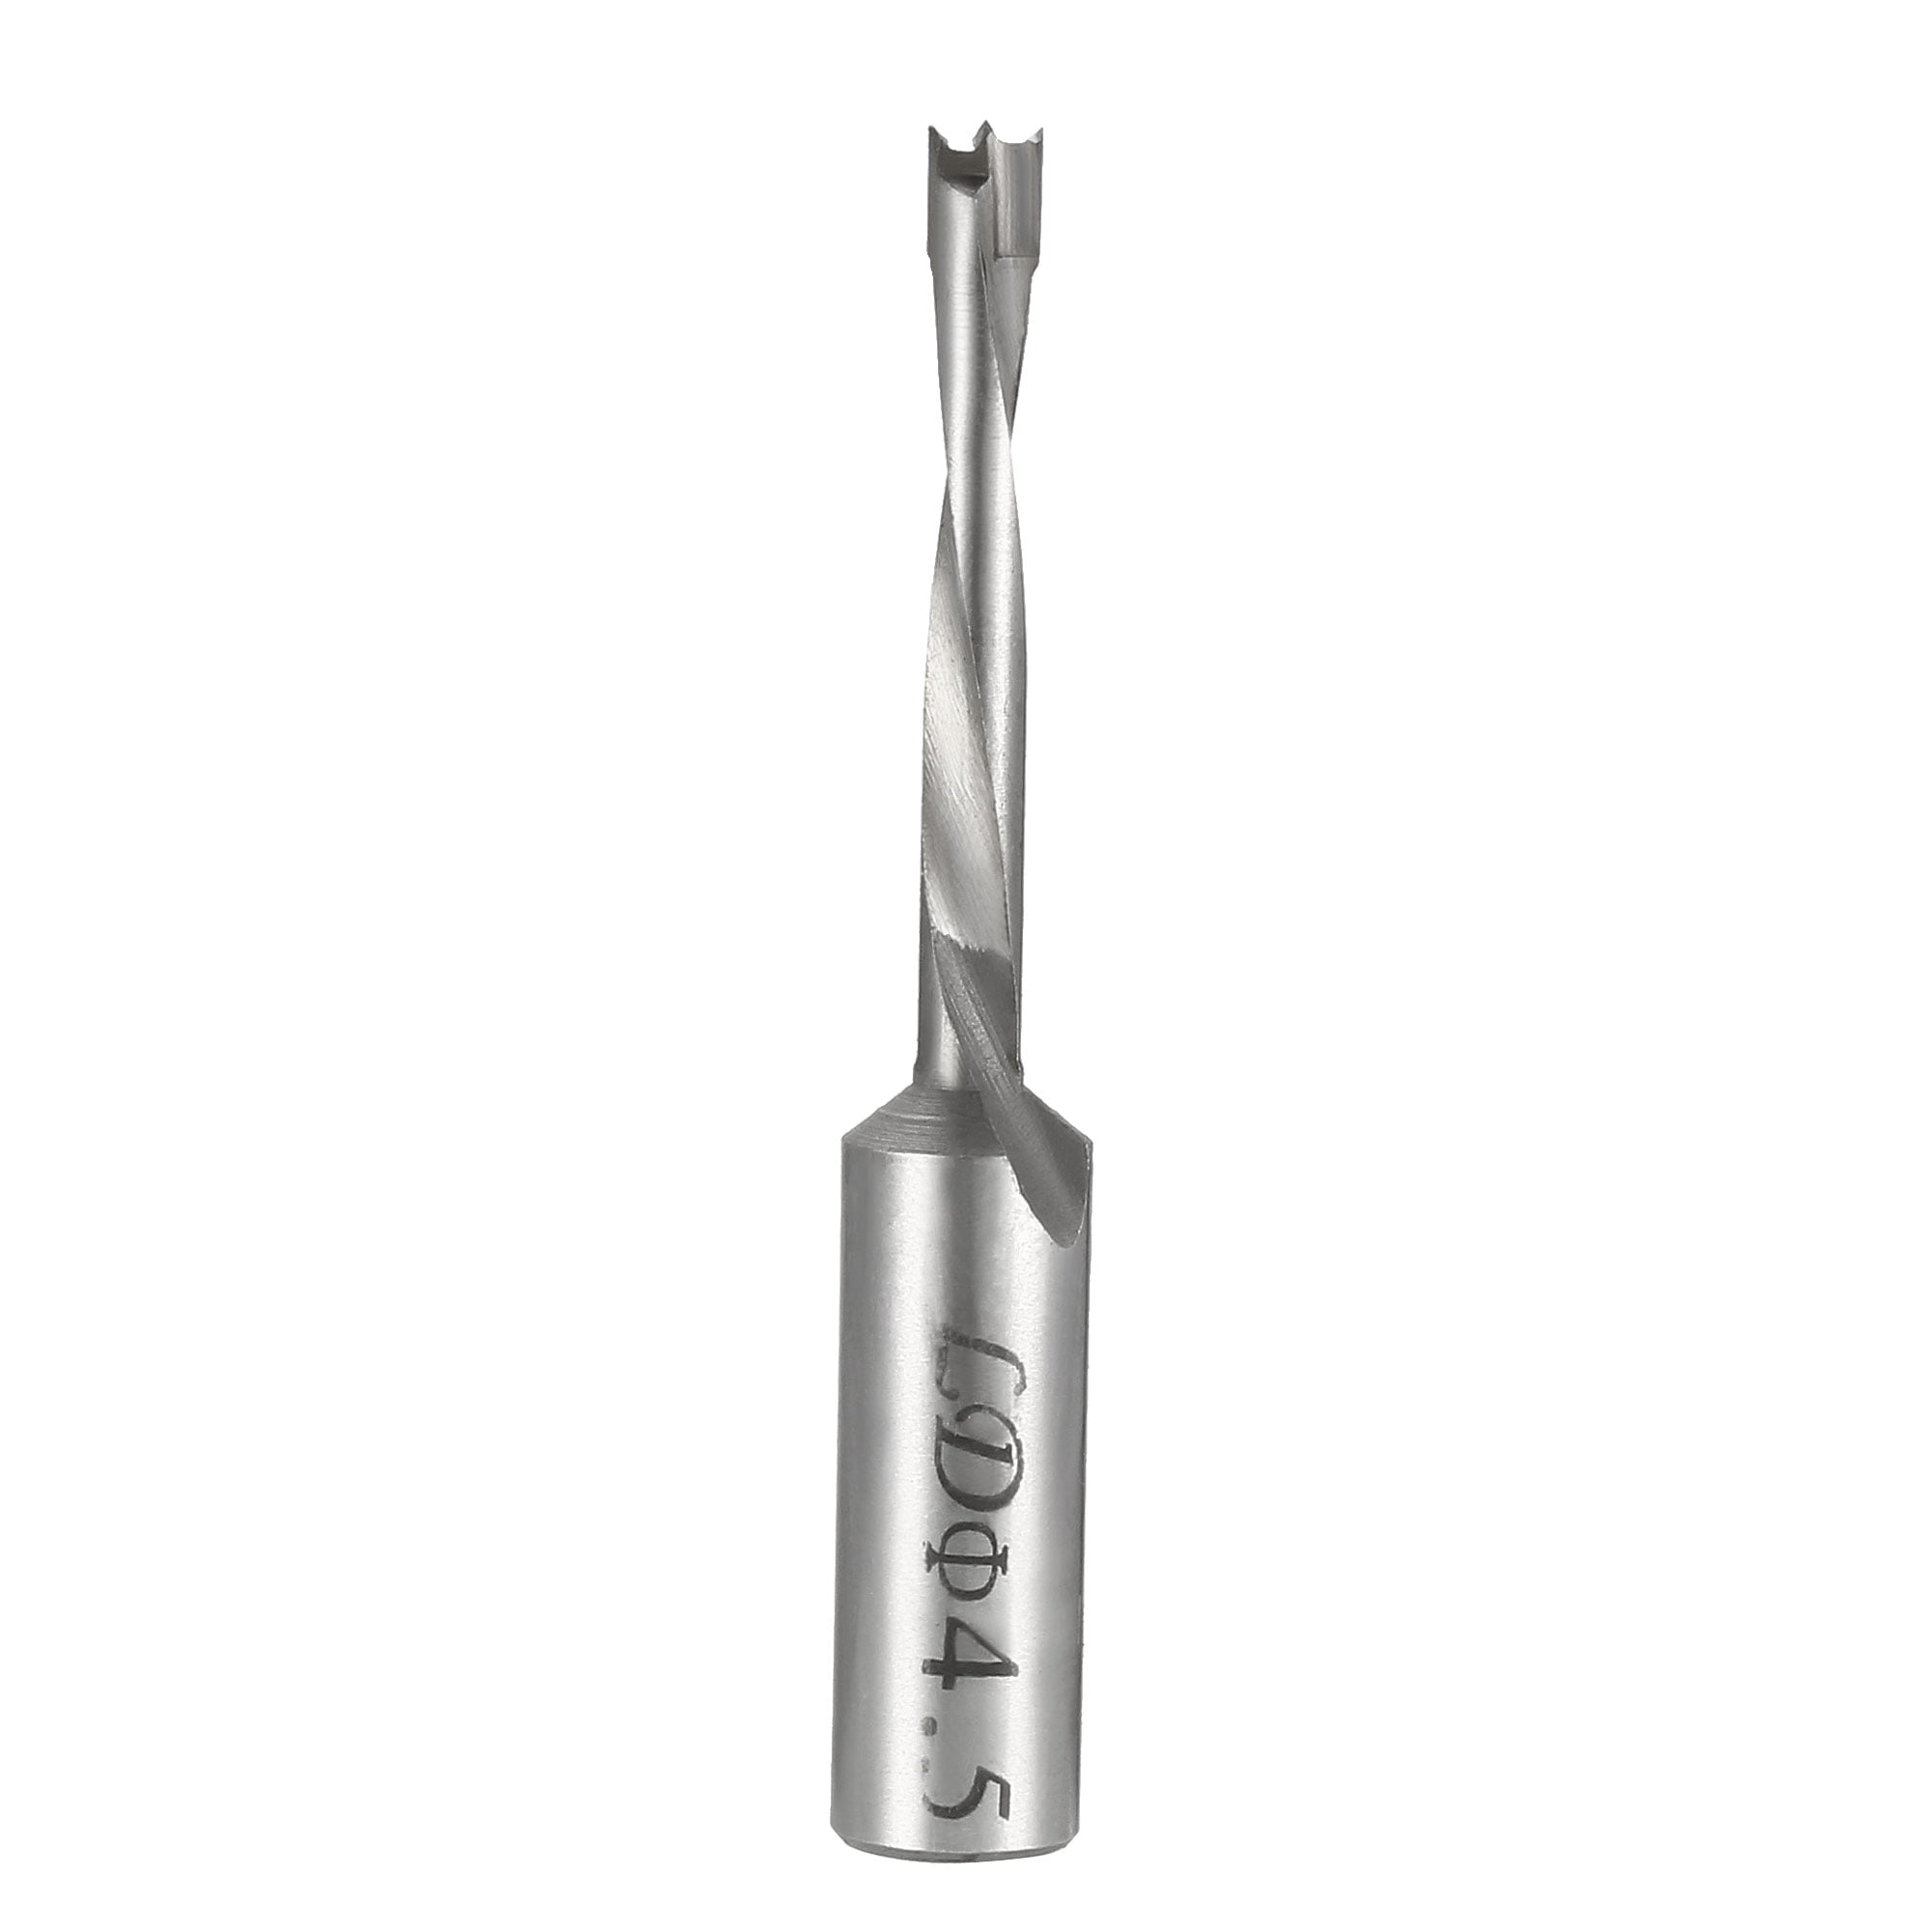 Brad Point drill bits for wood 10.5 mm x 68 mm left turning carbide for carpentry woodworking drilling tool 